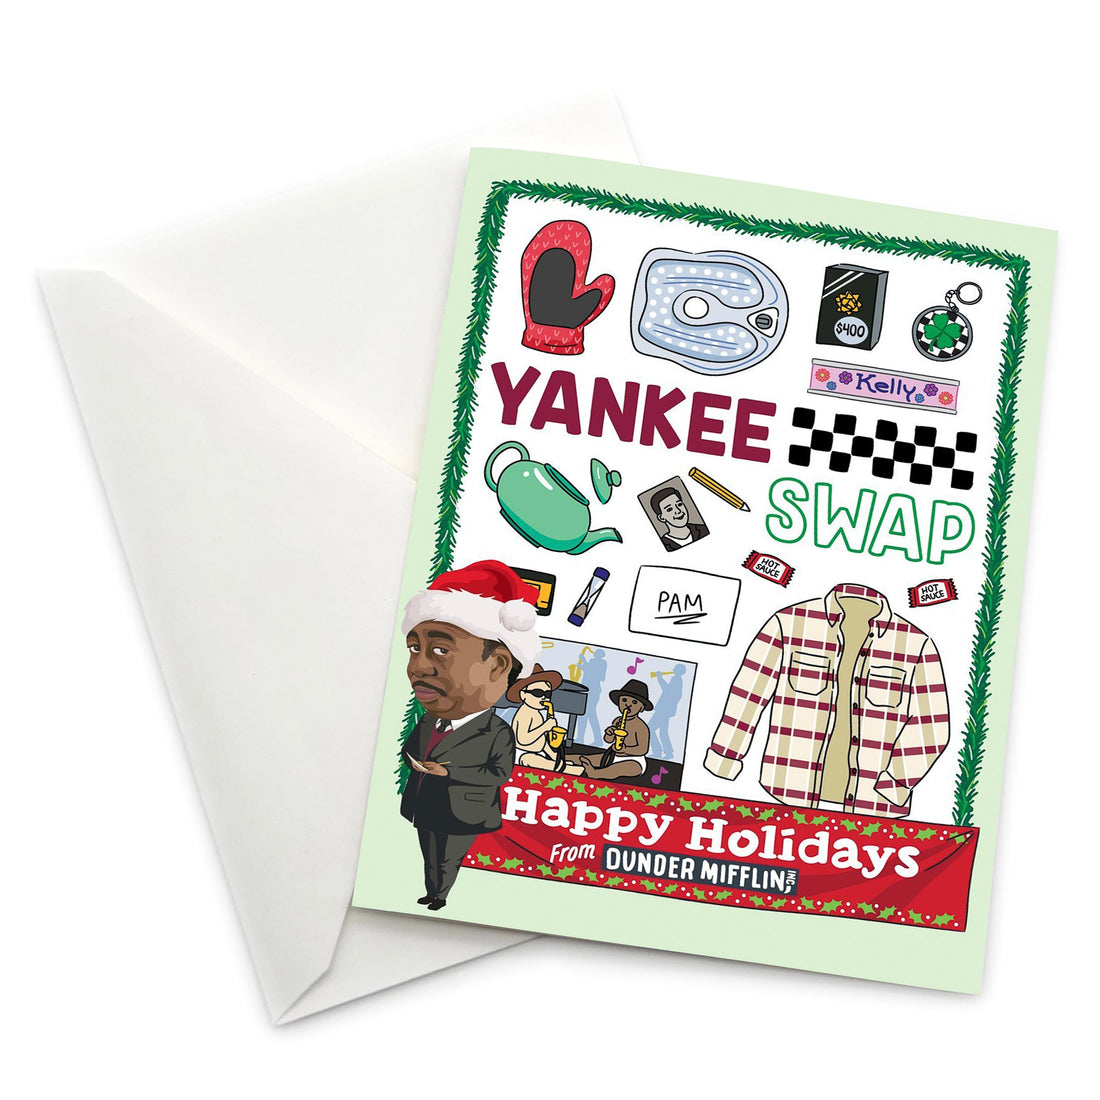 Yankee Swap Holiday Card - Official The Office Merchandise